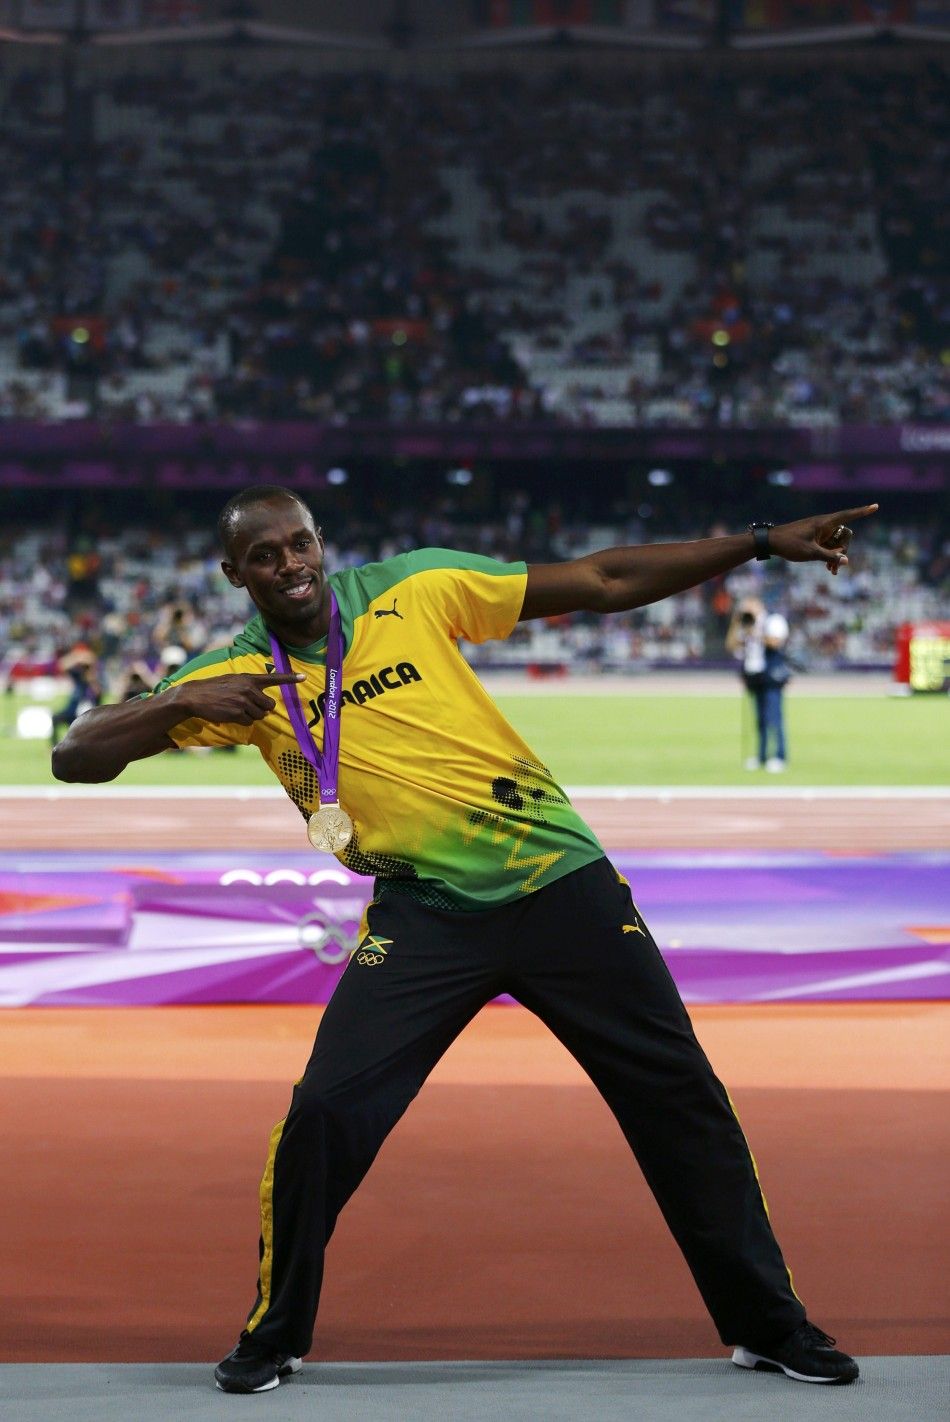 Fastest Athlete or Greatest Athlete in the World, Usain Bolt is Medias Delight Photos